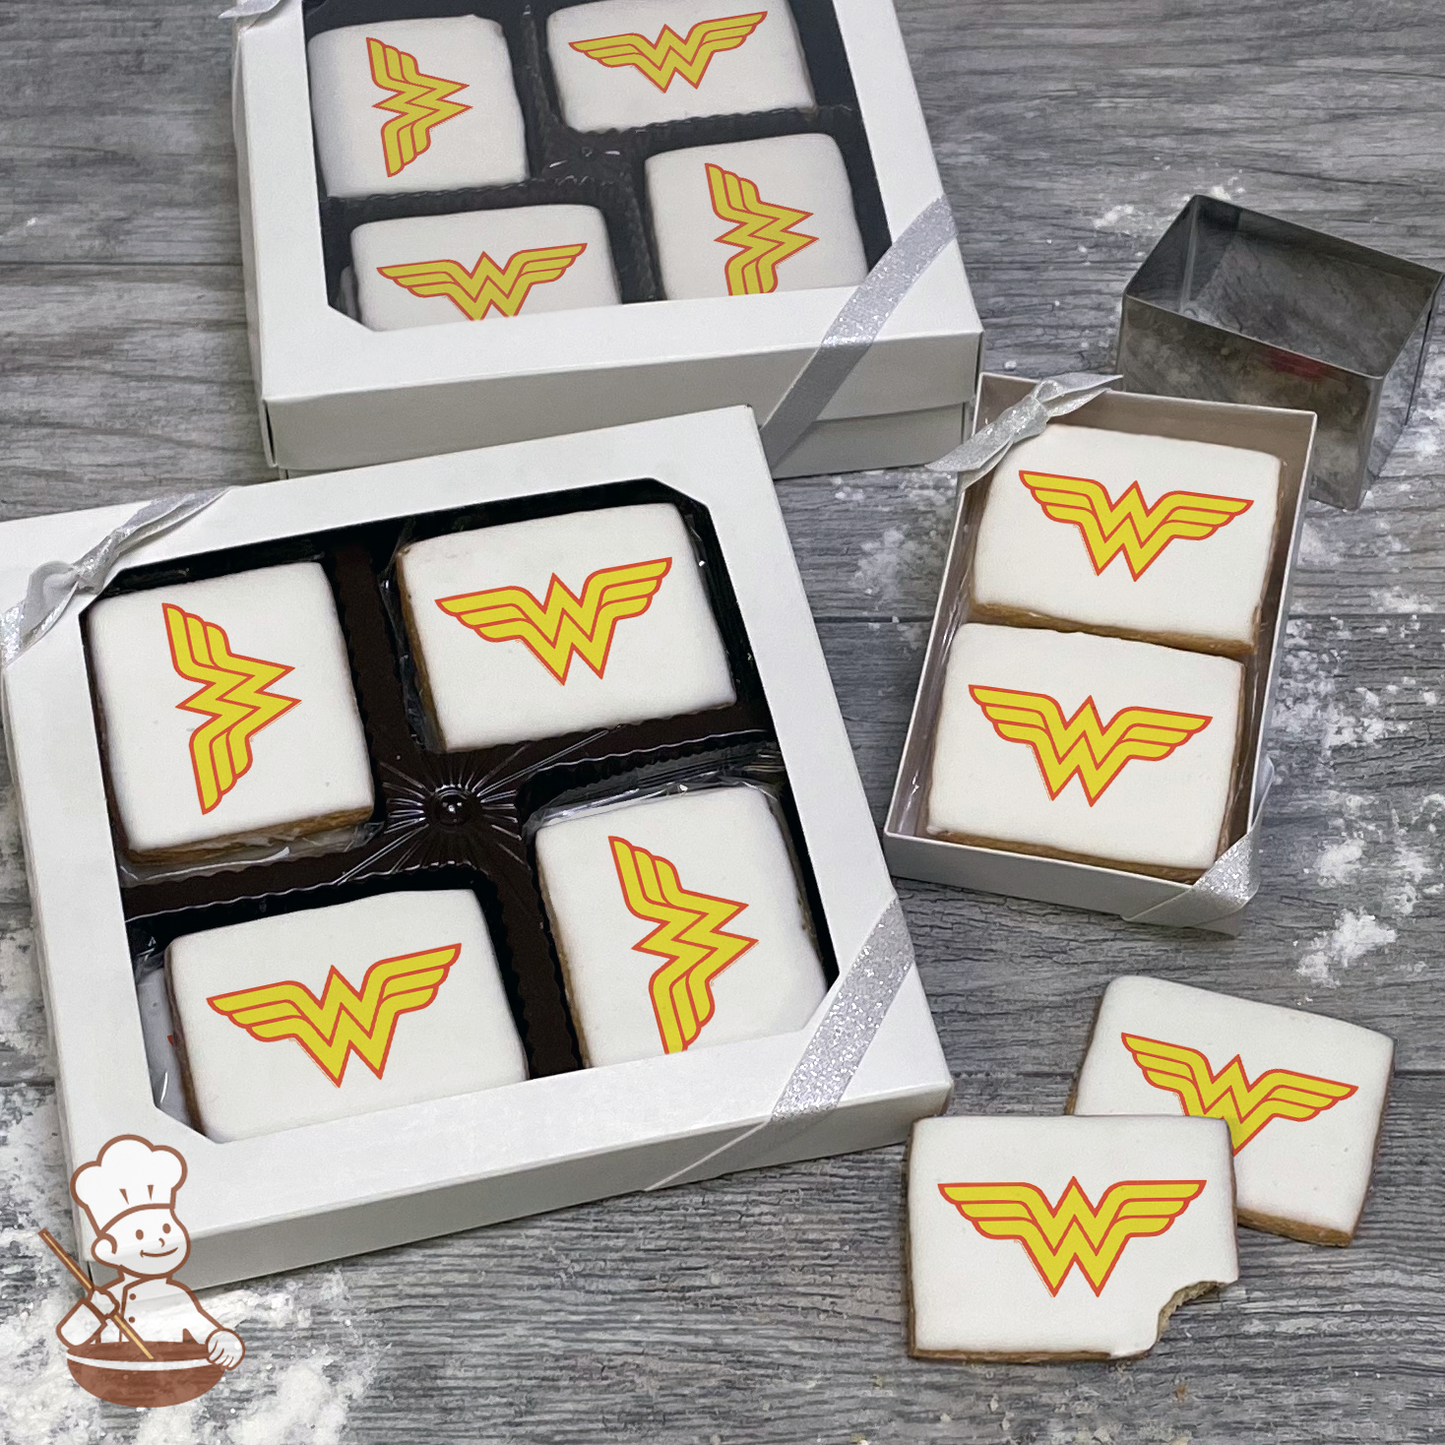 Wonder Woman Cookie Gift Box (Rectangle)